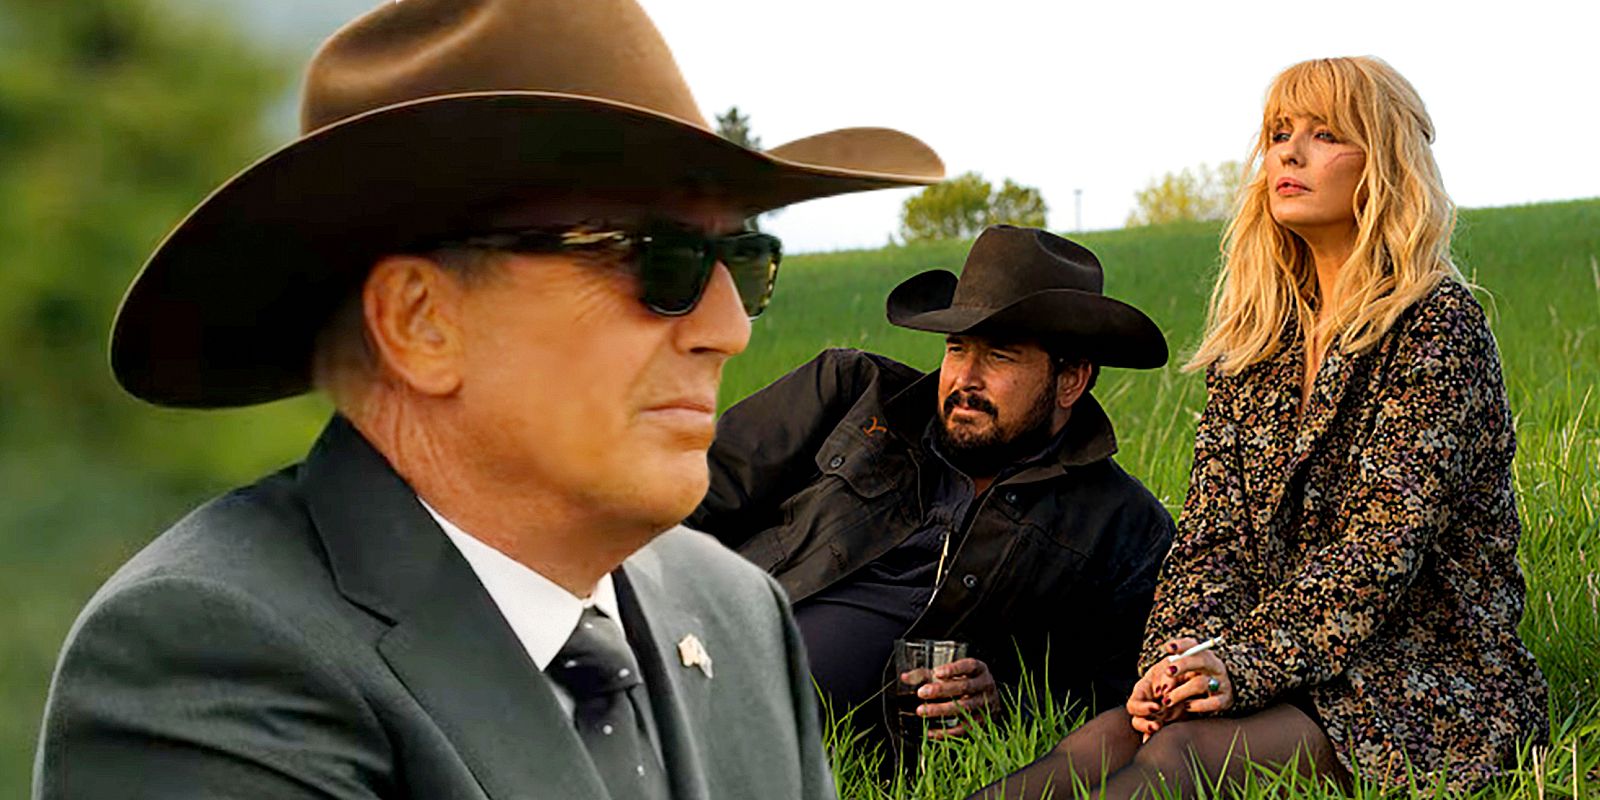 Kevin Costner, Cole Hauser, and Kelly Reilly in Yellowstone season 5